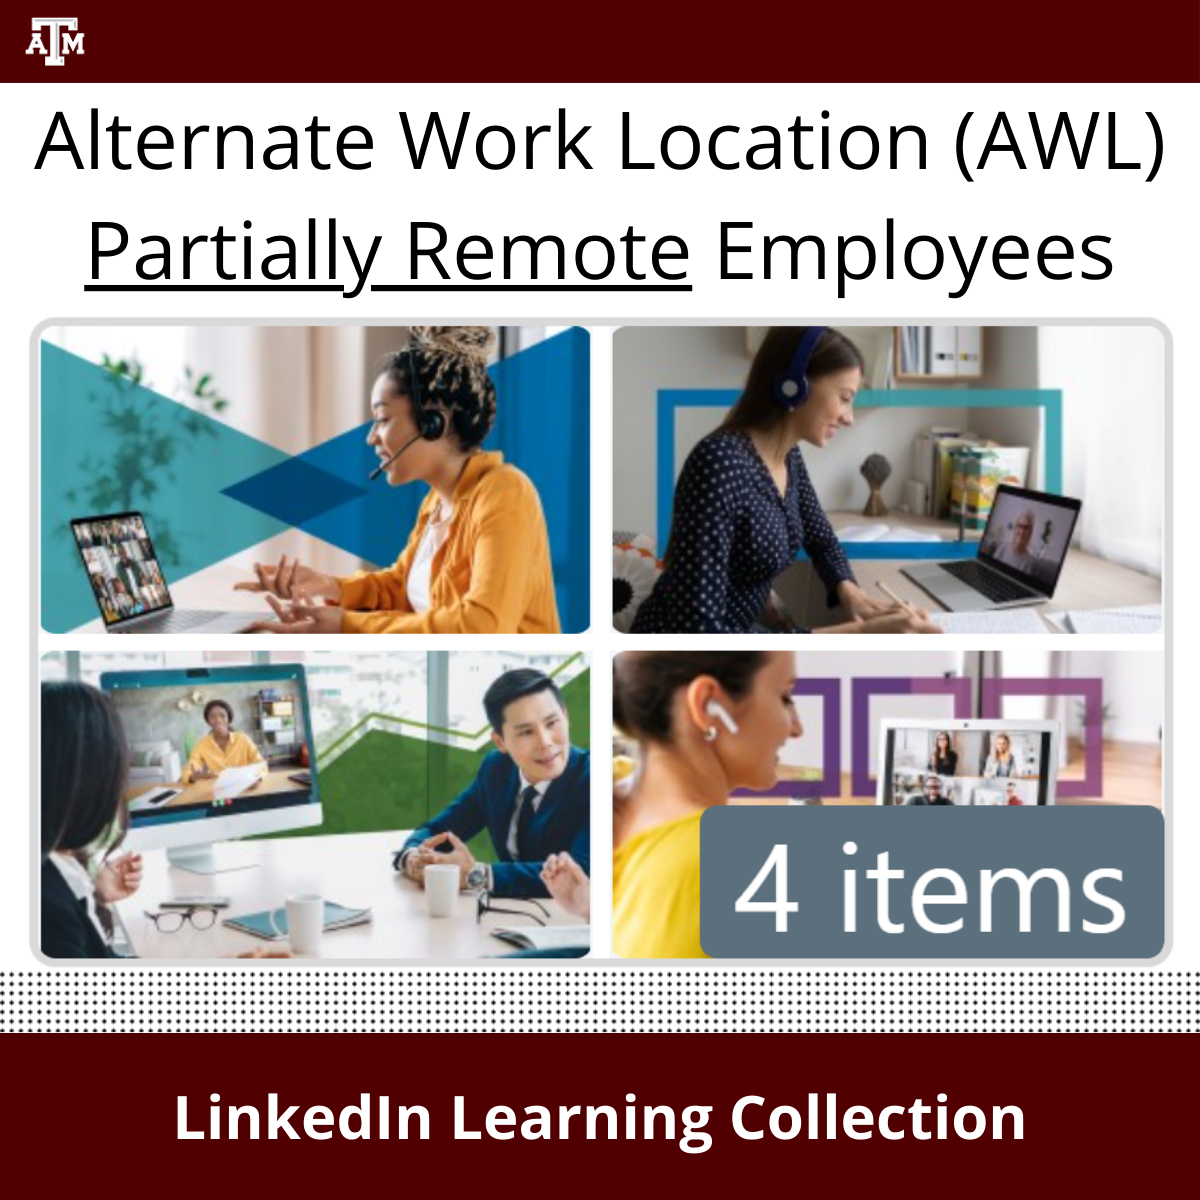 Alternate Work Location - Partially Remote Employees LinkedIn Learning Collection